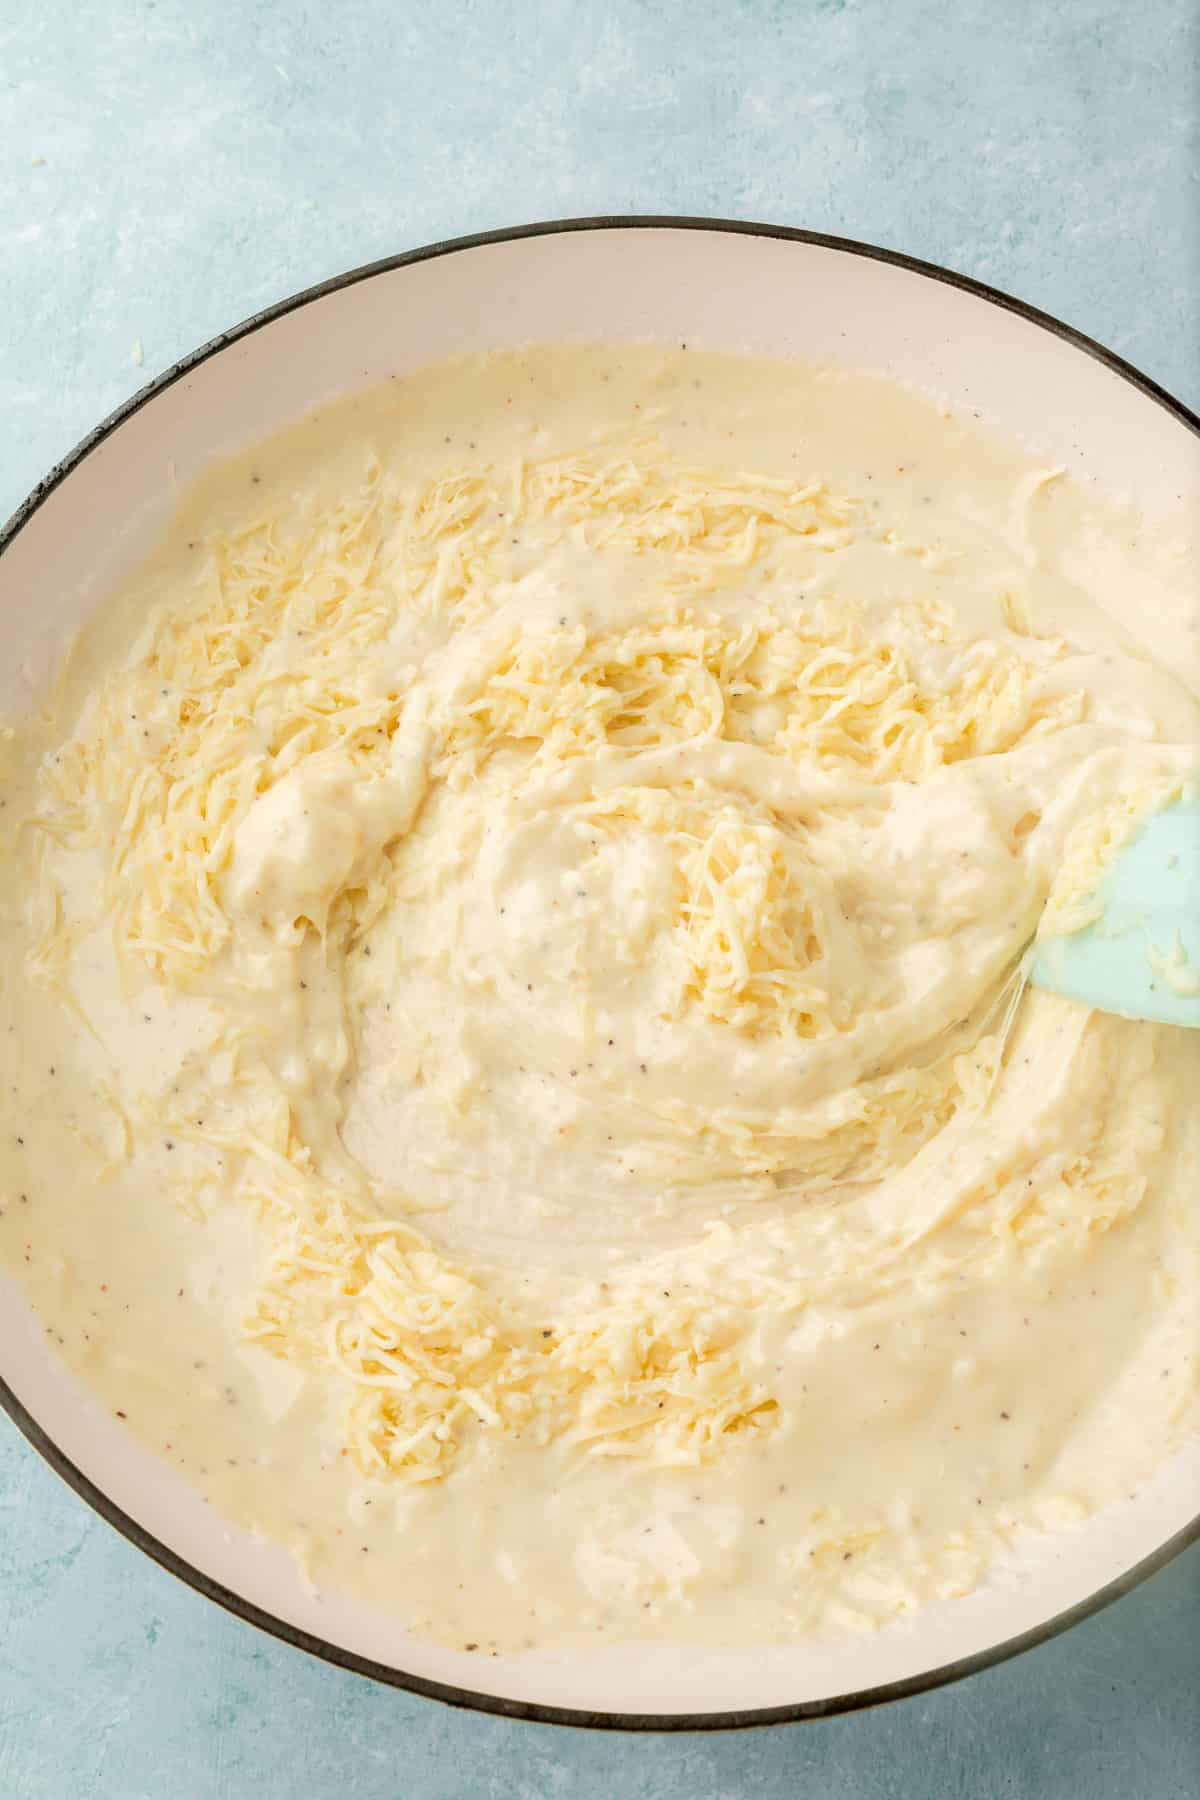 An overhead view of shredded mozzarrella cheese being stirred into a white cream sauce with a blue spatula.